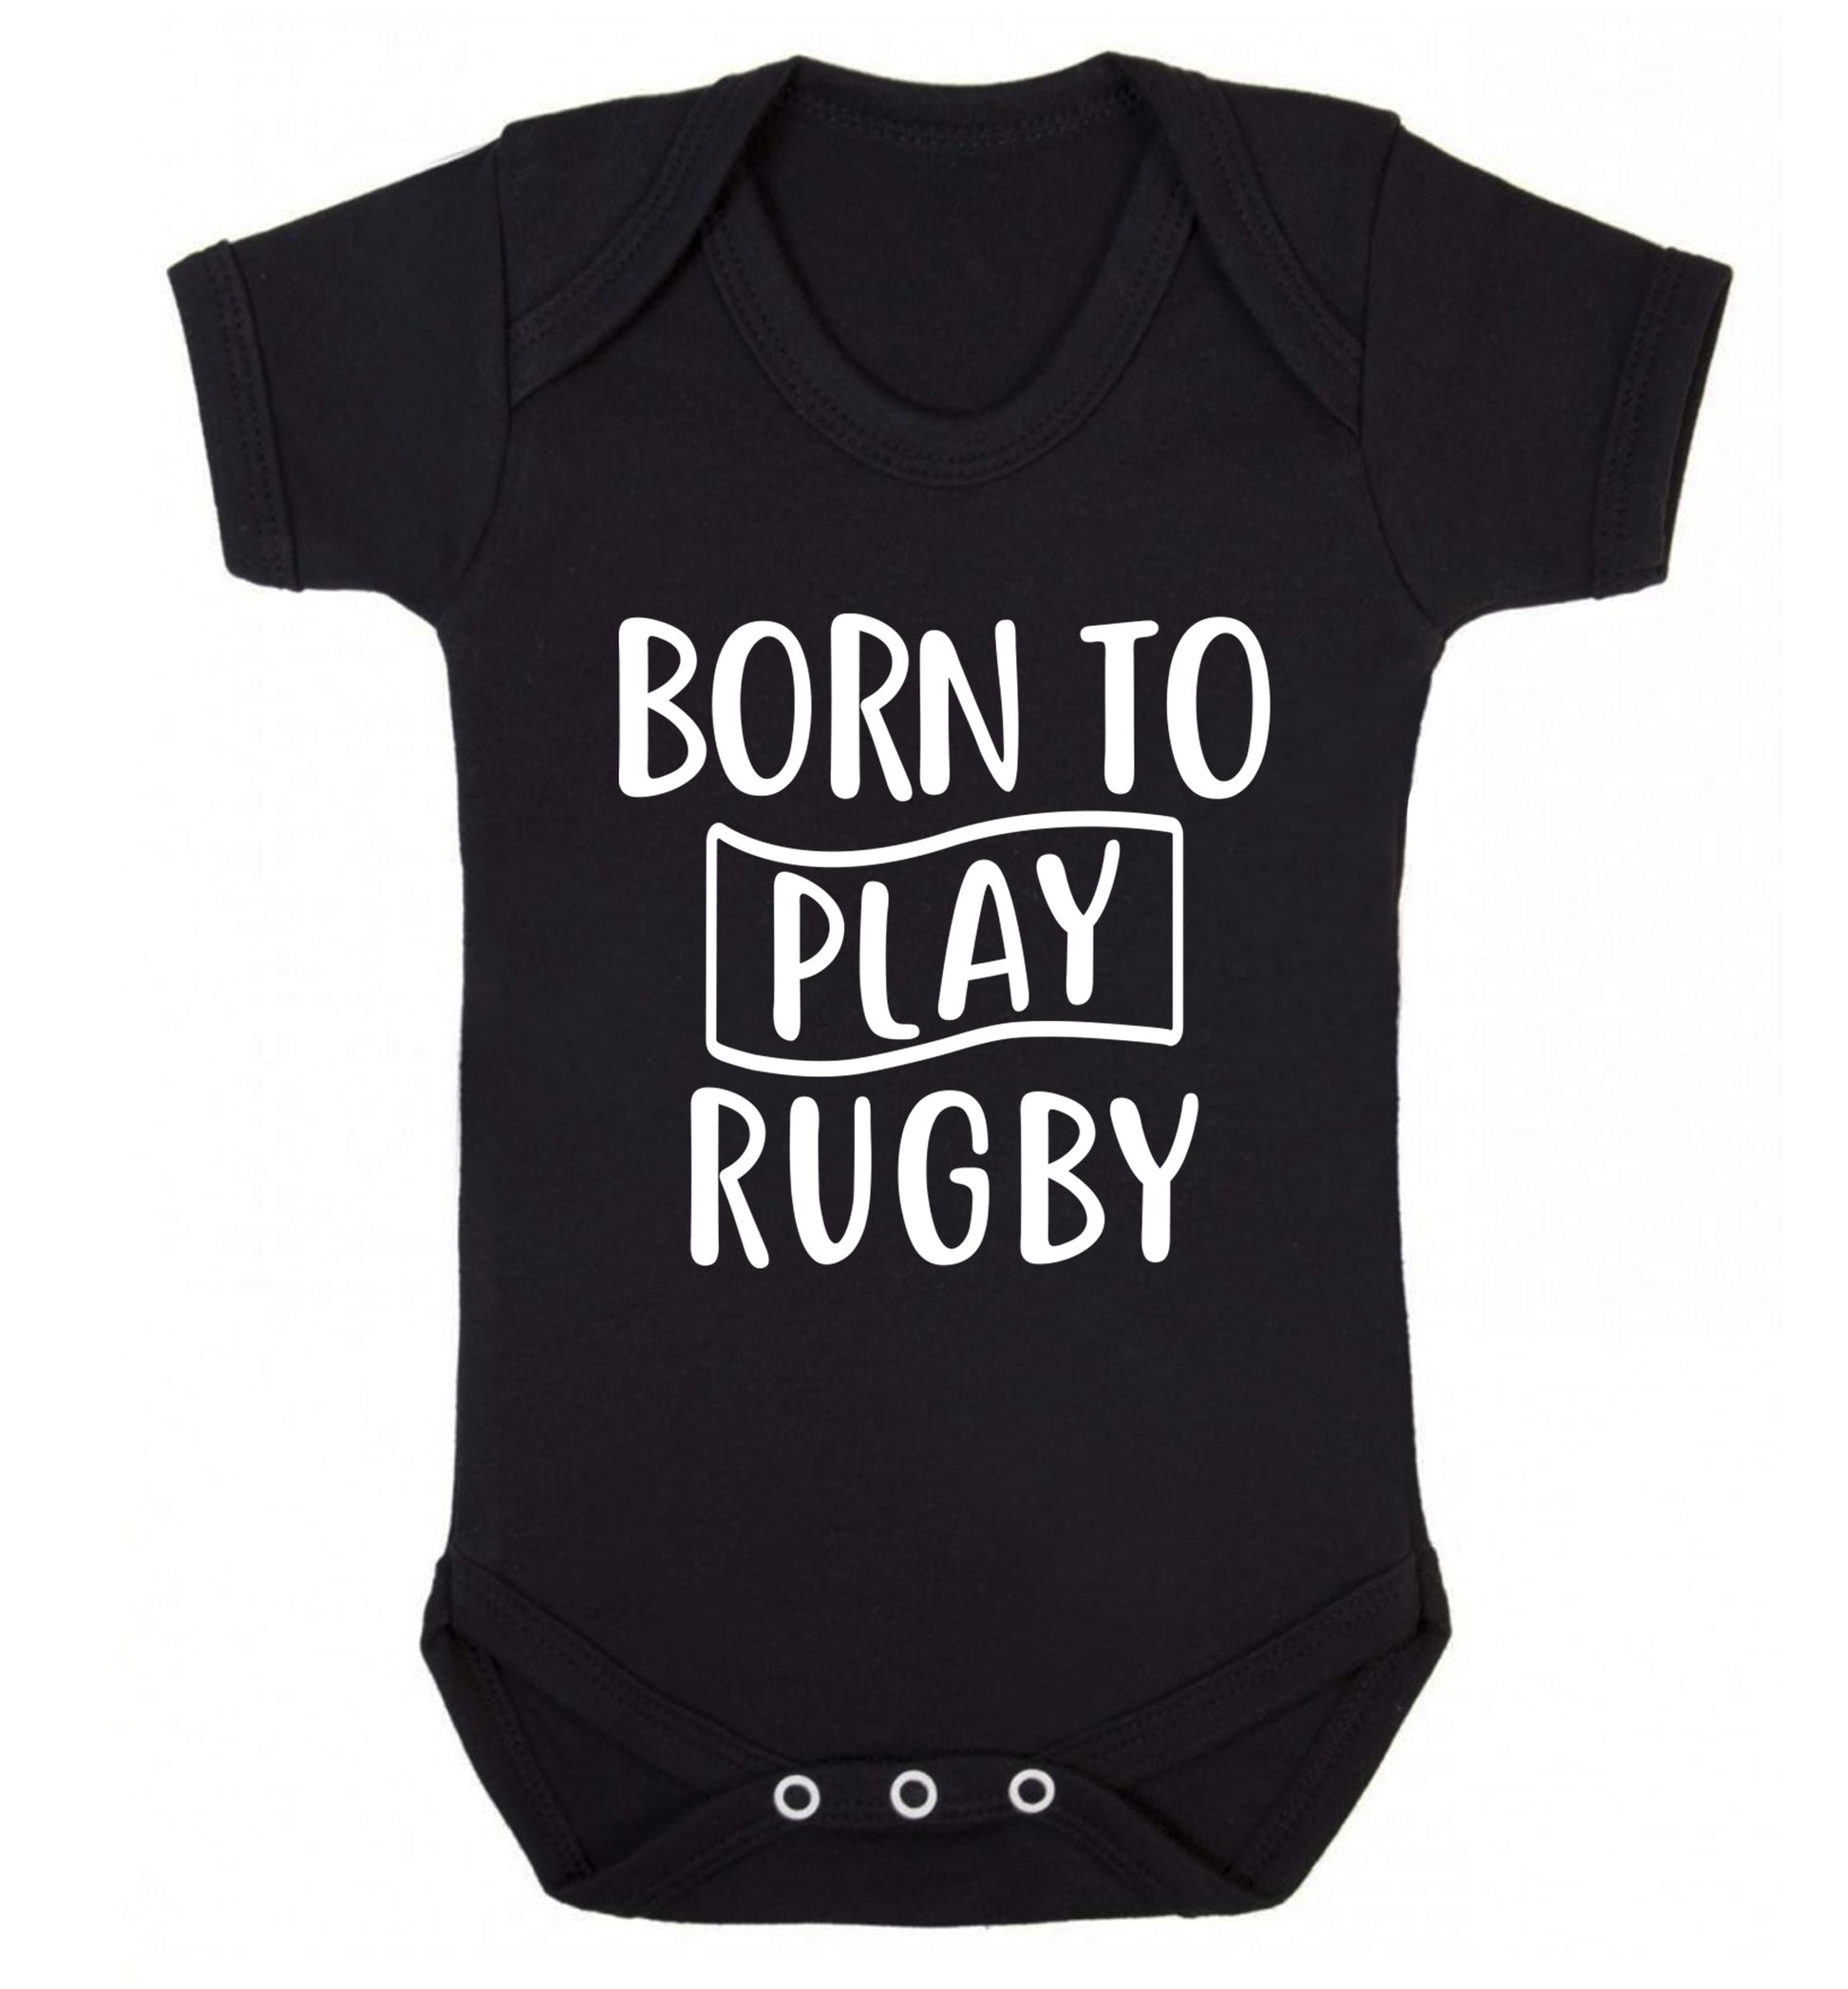 Born to play rugby Baby Vest black 18-24 months